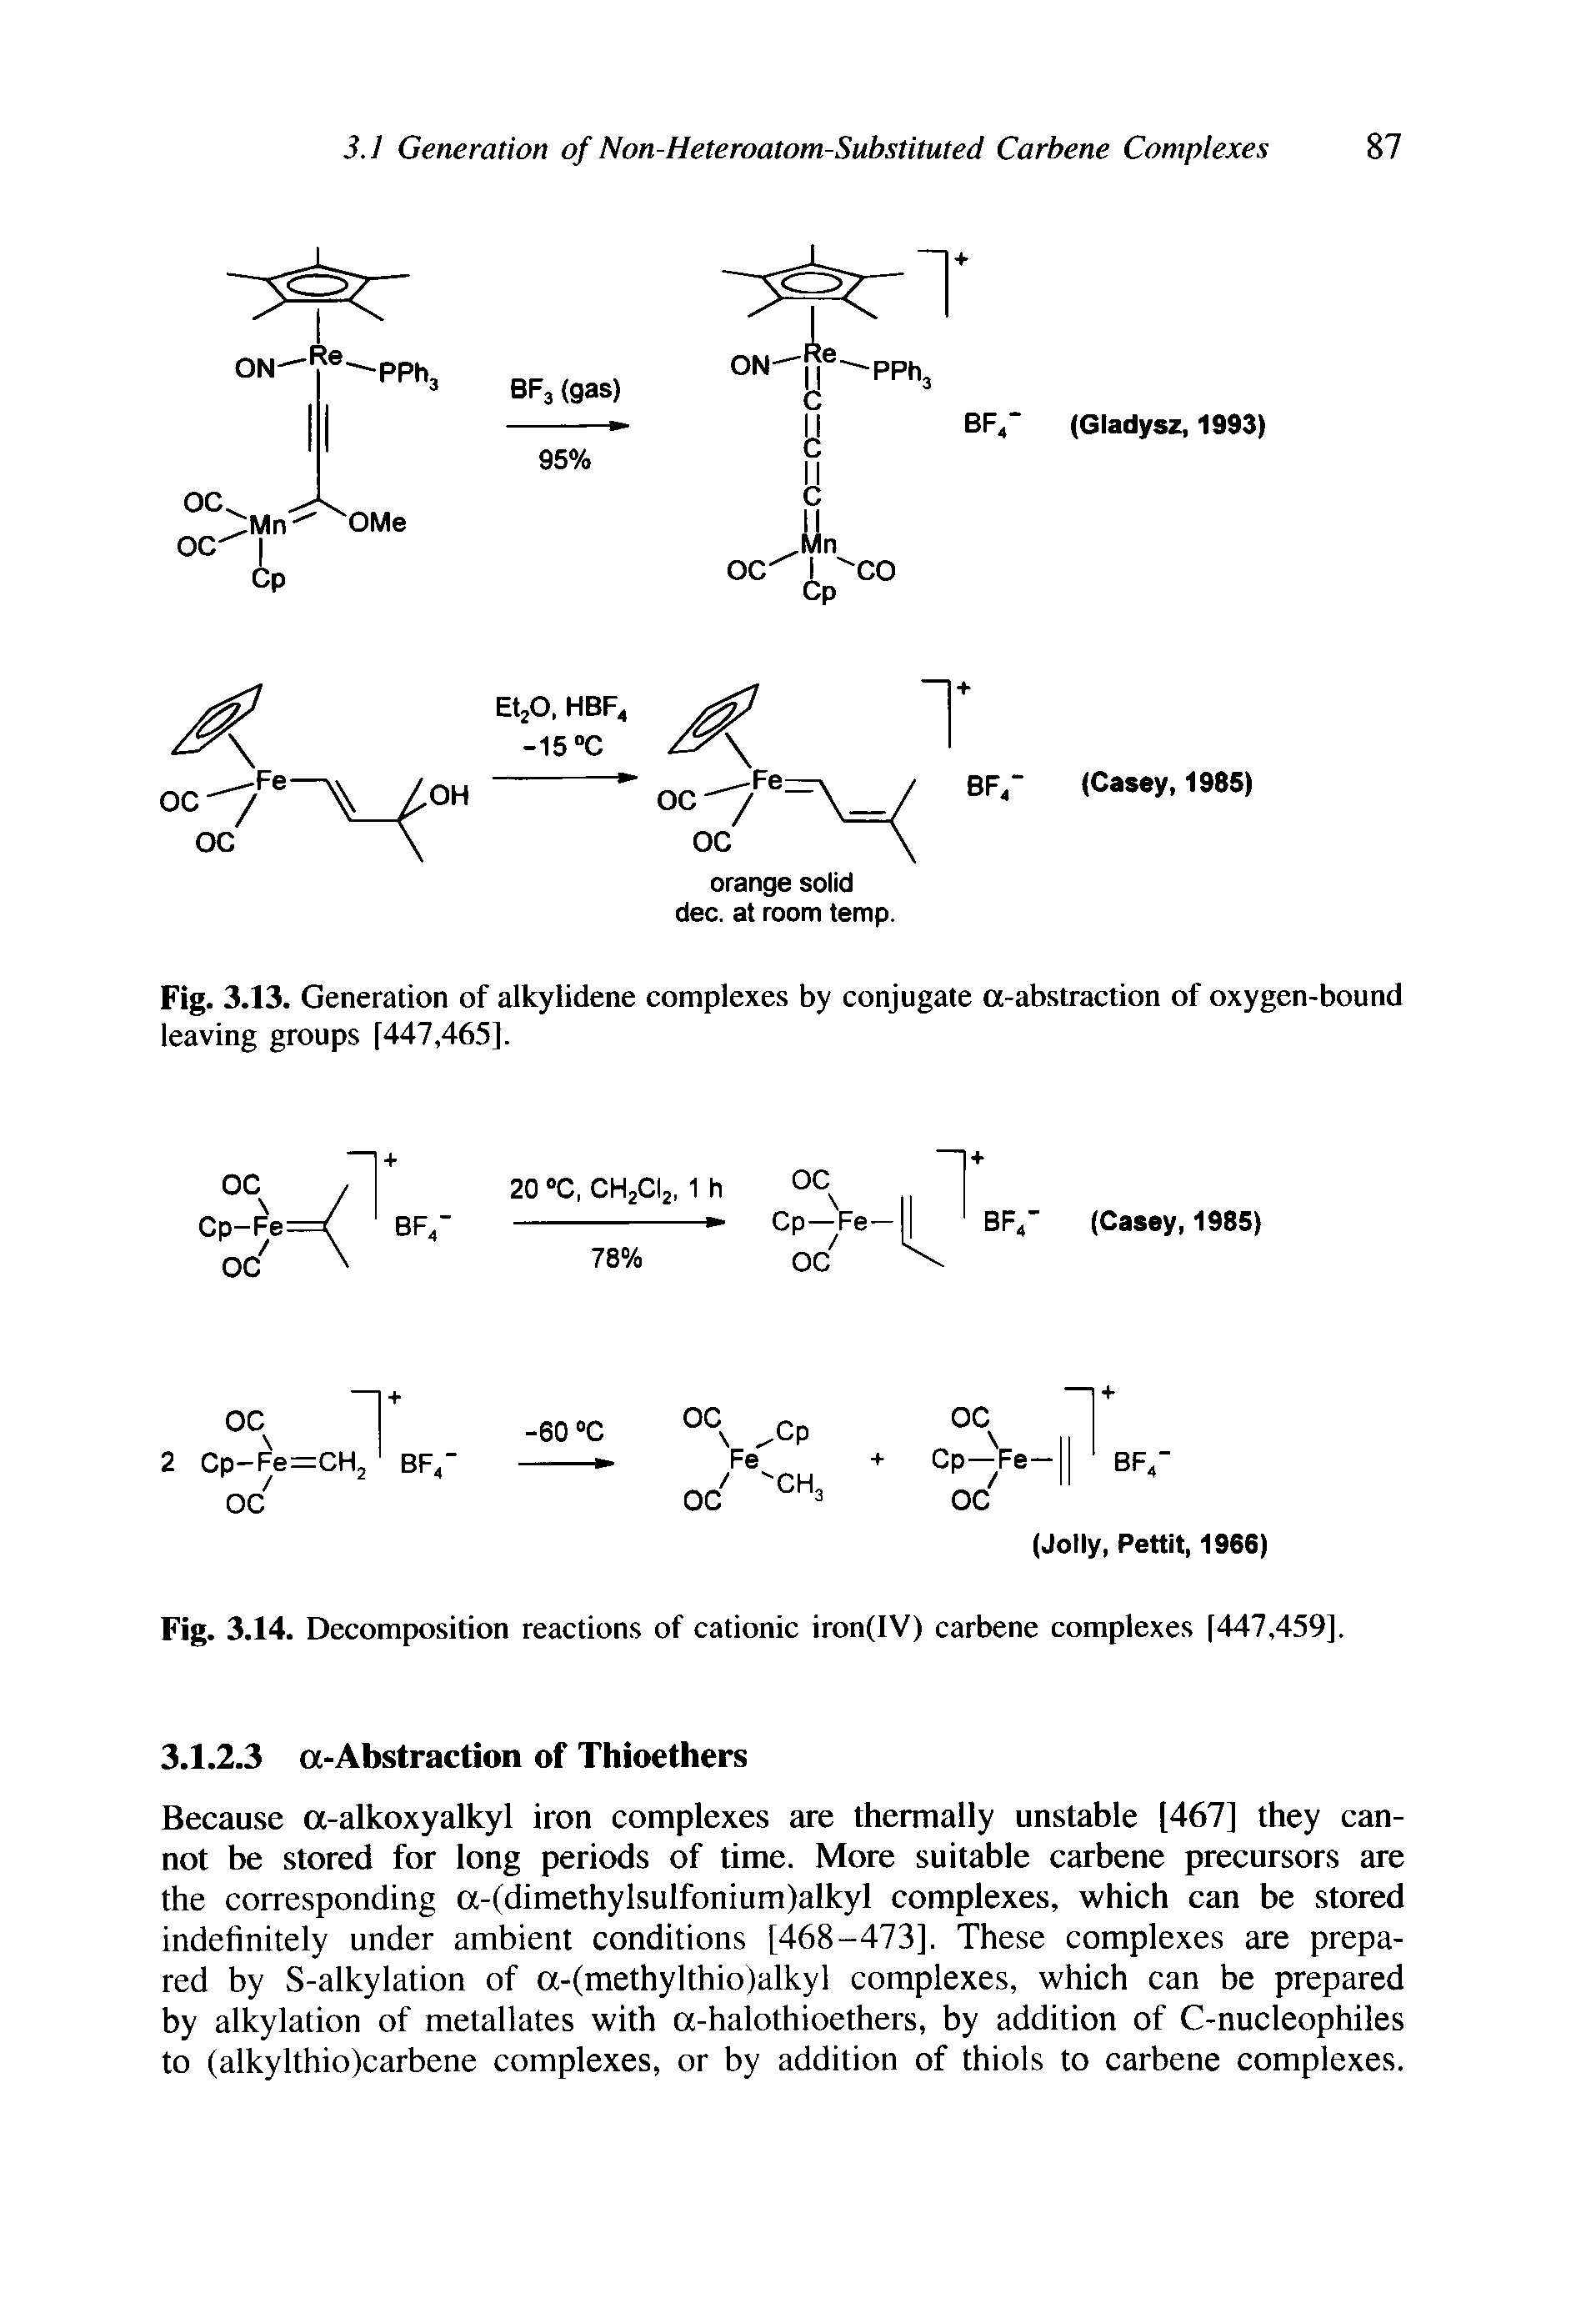 Fig. 3.14. Decomposition reactions of cationic iron(IV) carbene complexes [447,459].